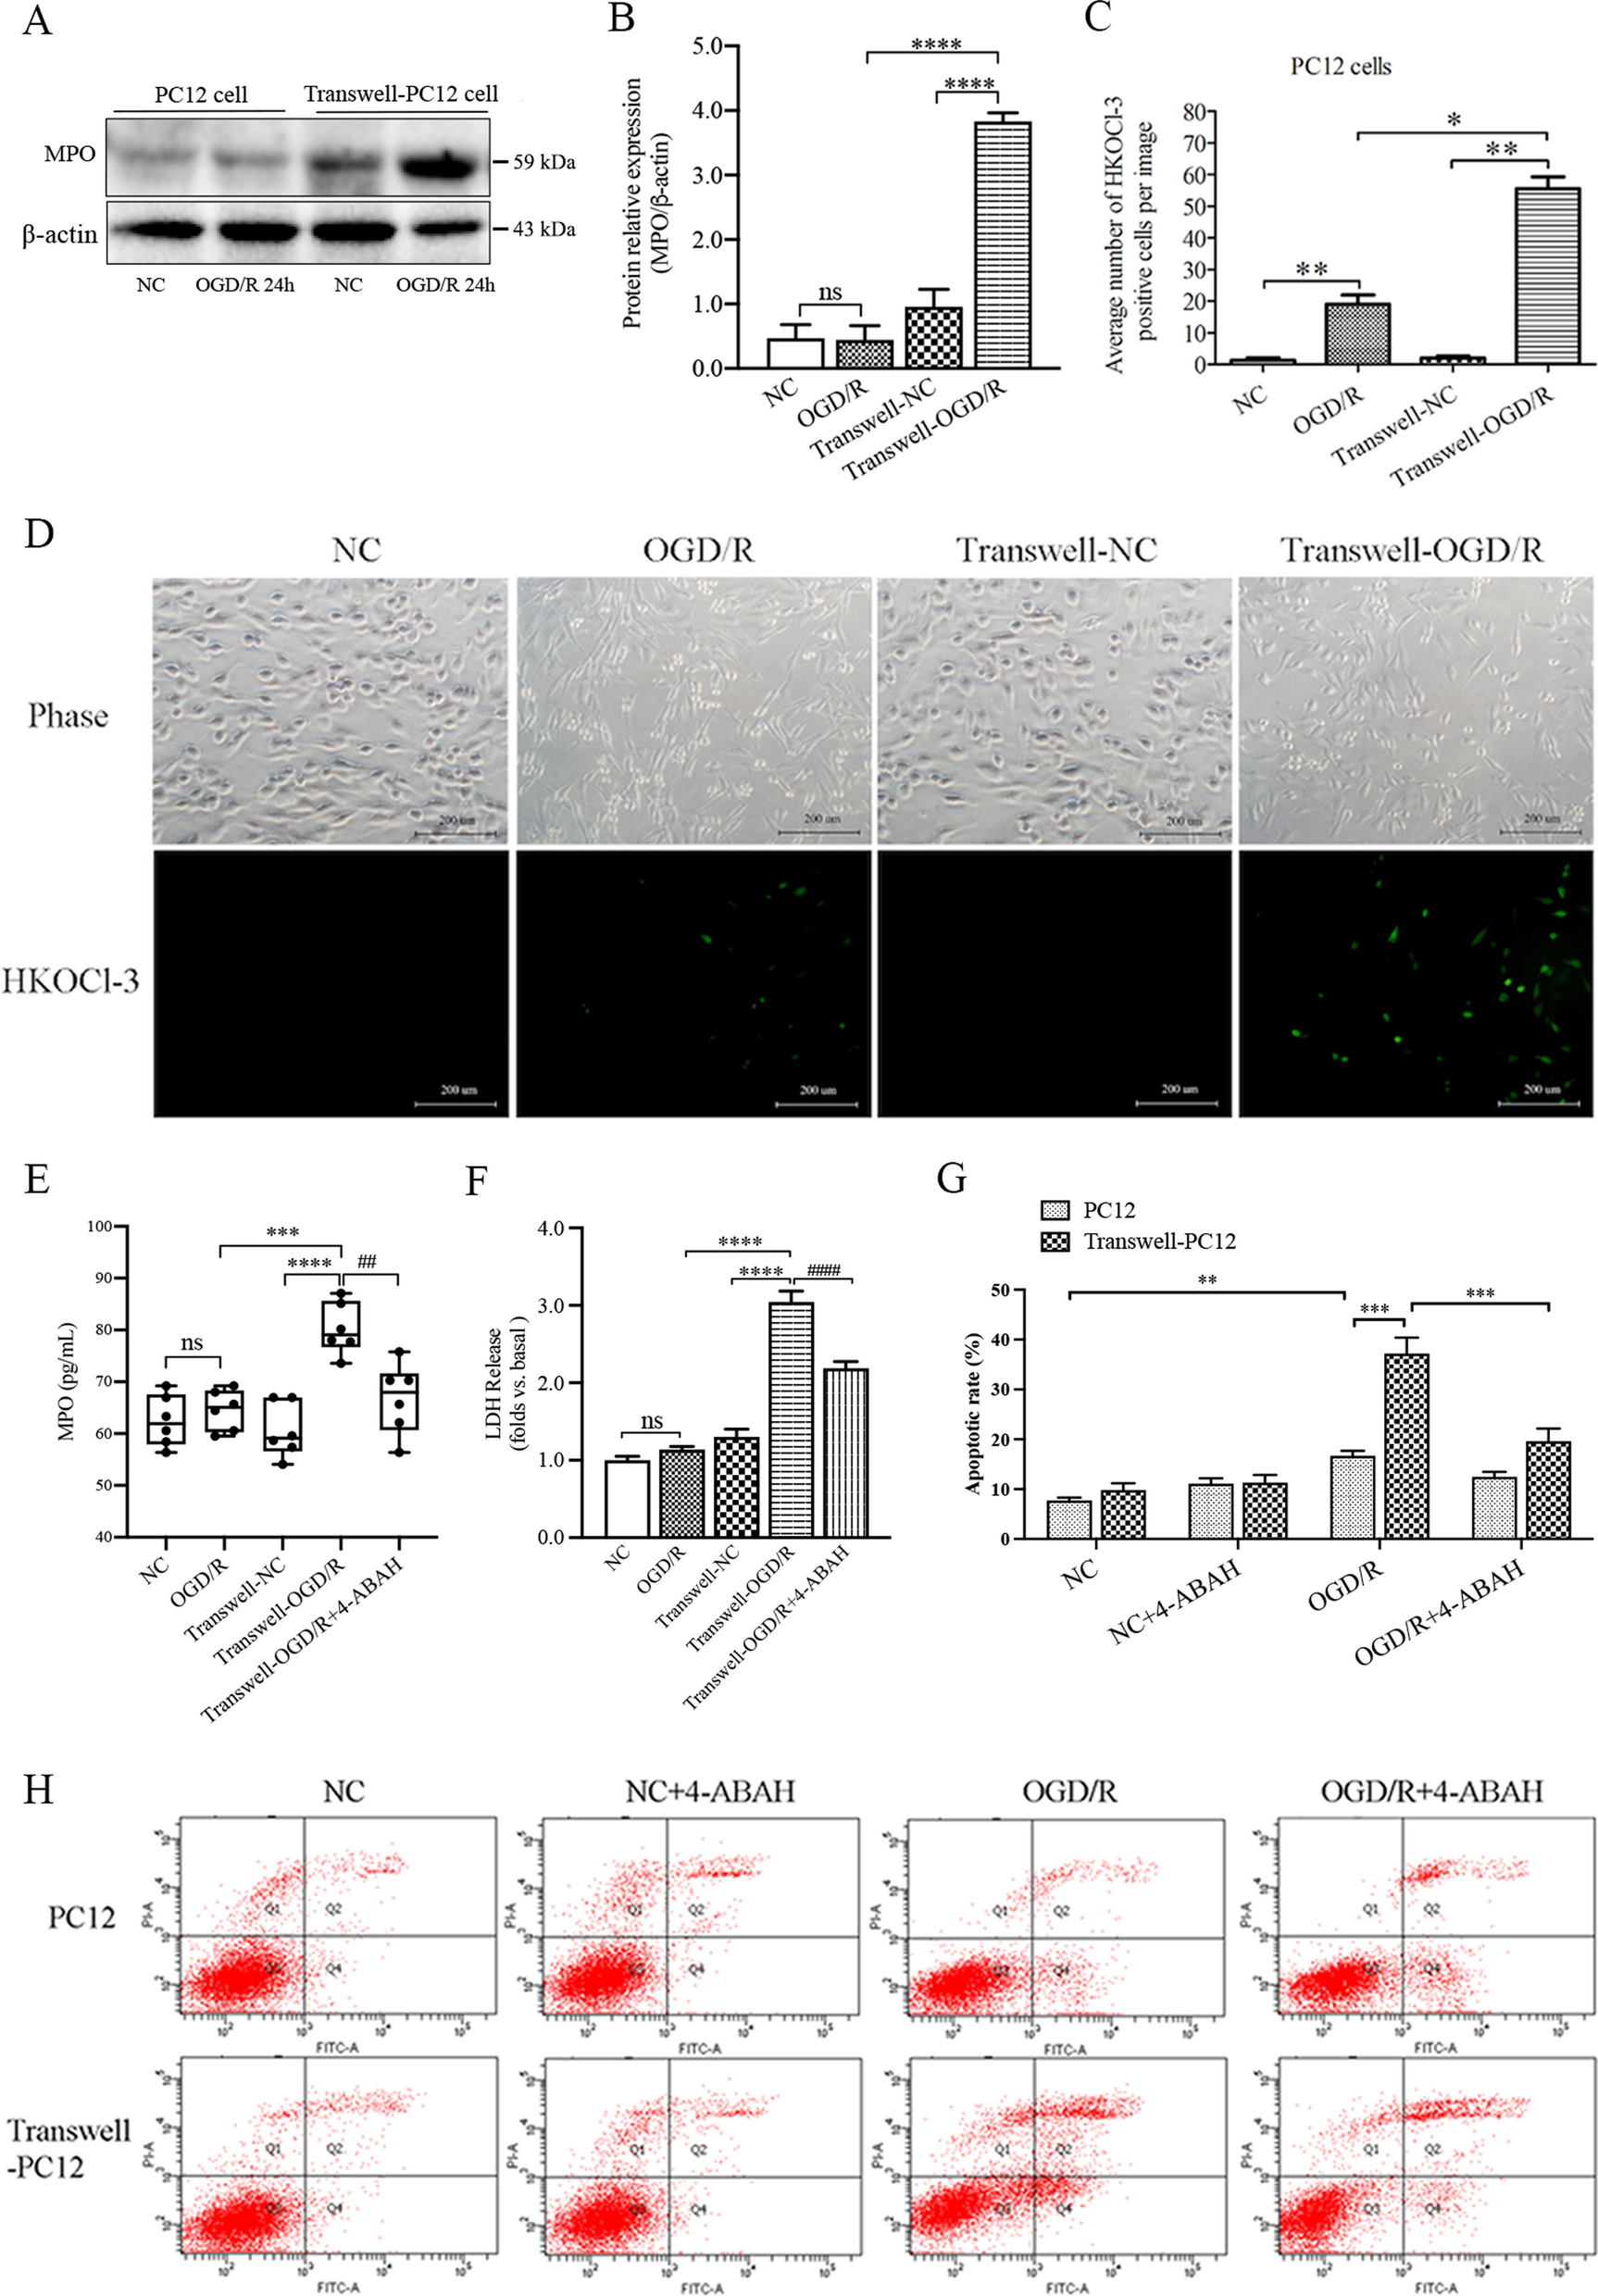 Hypochlorous acid derived from microglial myeloperoxidase could mediate high-mobility group box 1 release from neurons to amplify brain damage in cerebral ischemia–reperfusion injury